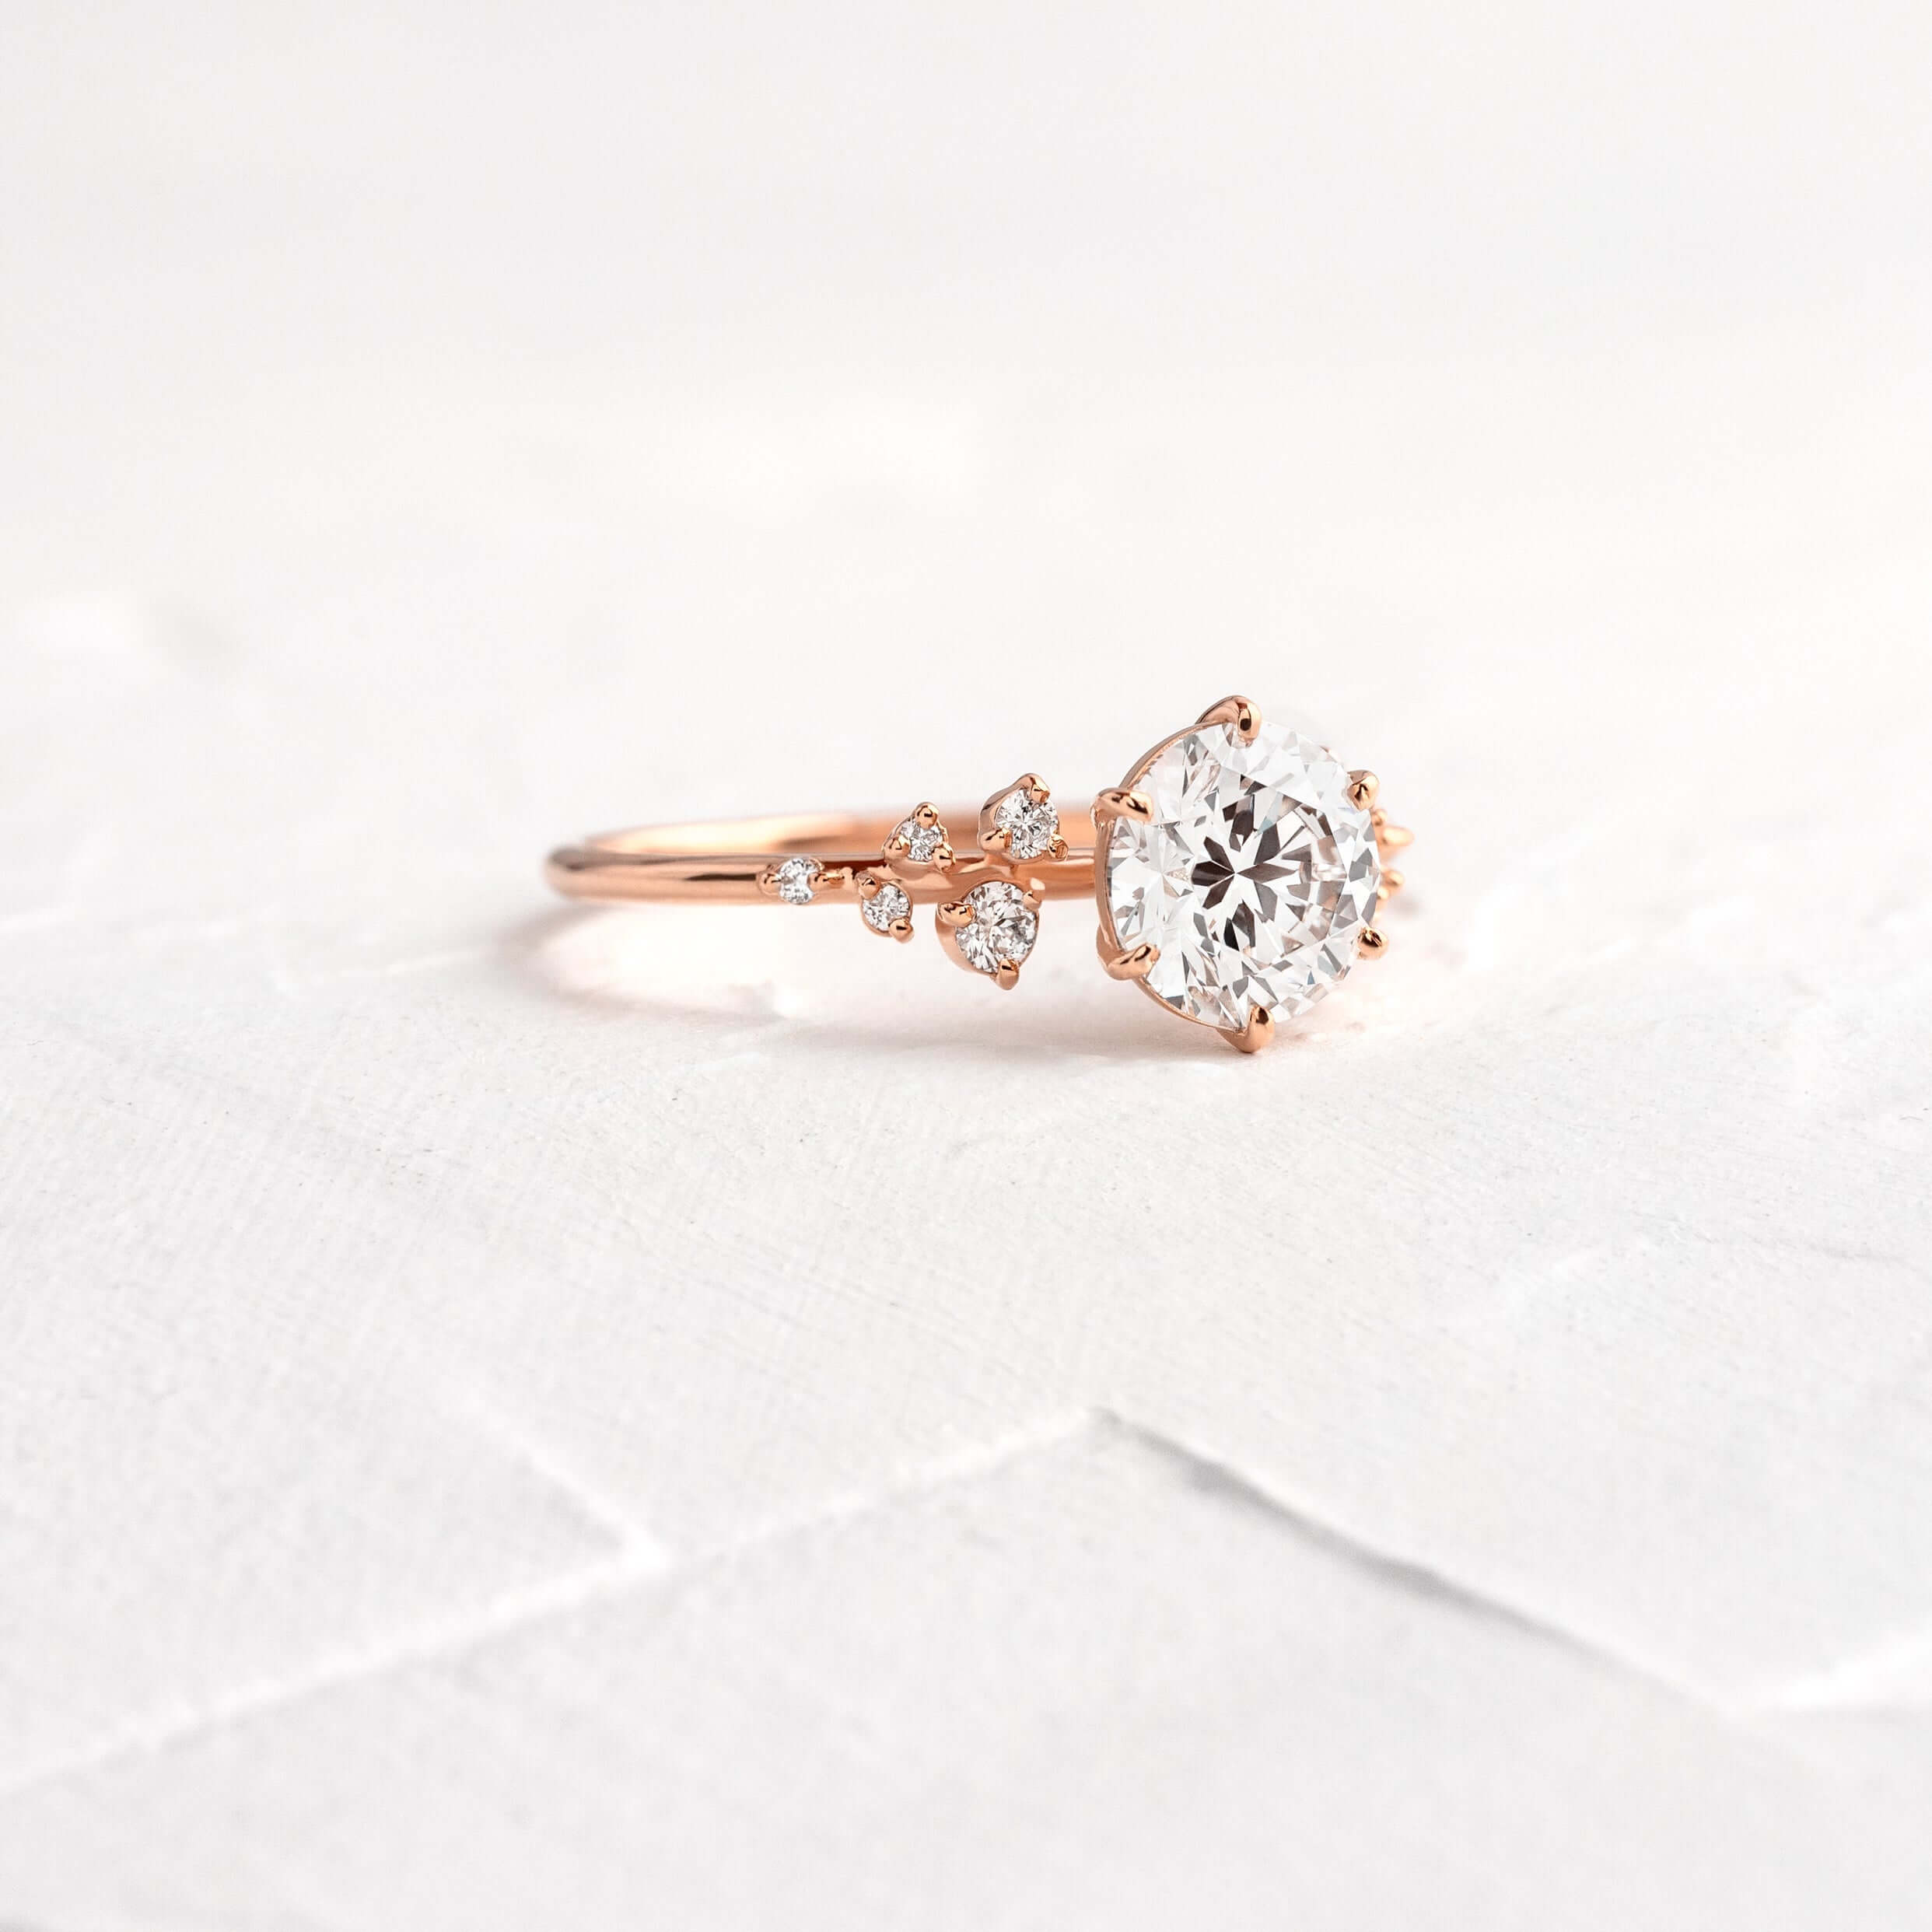 Snowdrift Ring - Round Cut Diamond | Handcrafted Engagement Ring ...